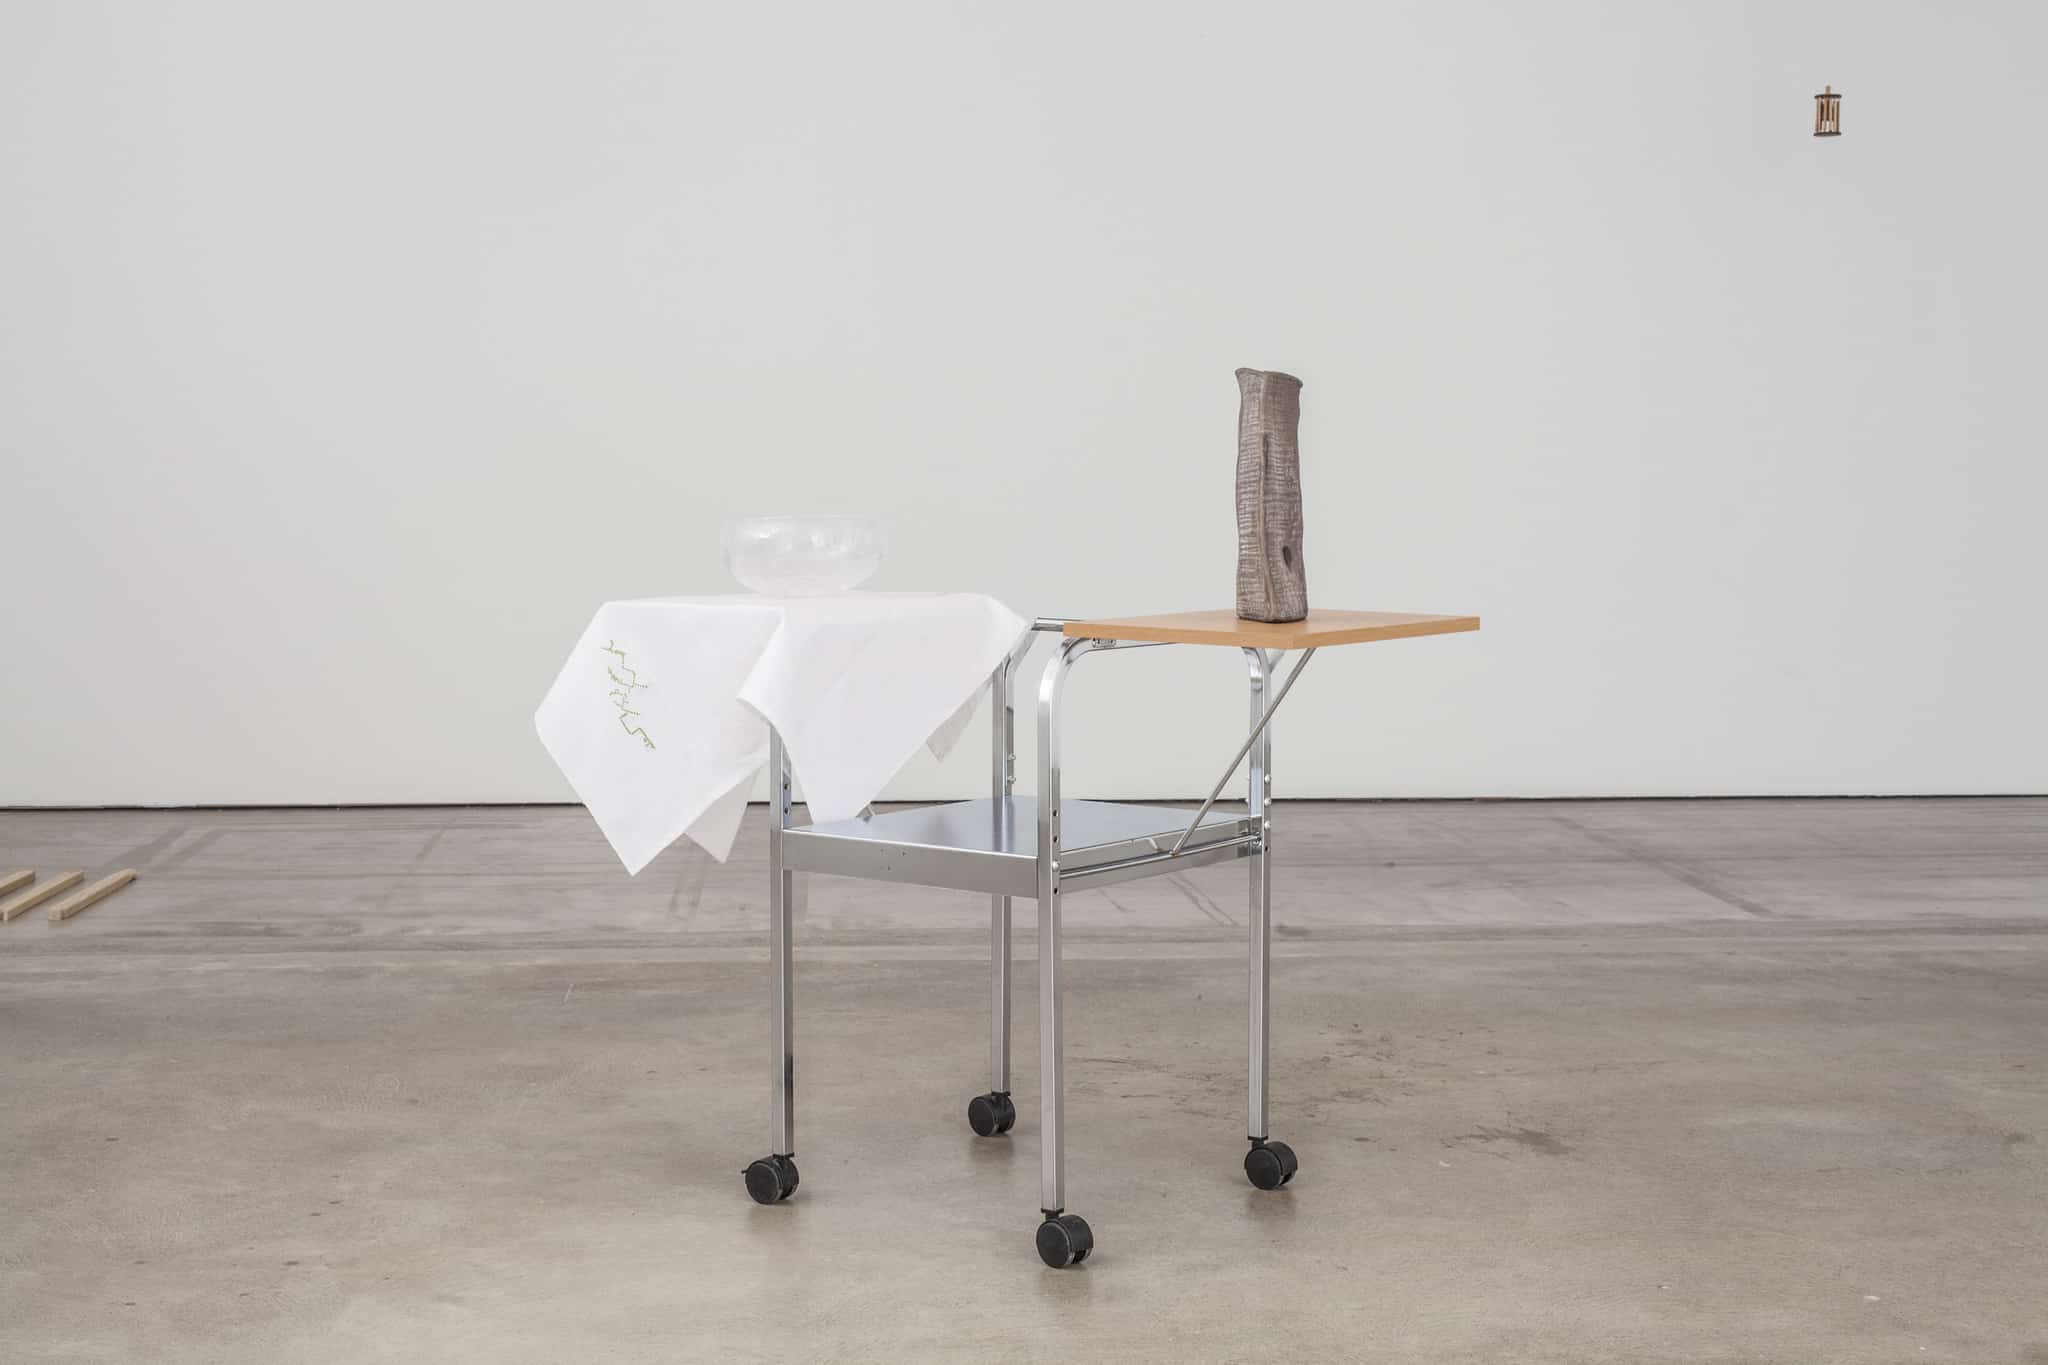 Cotton tablecloth by Ekaterini & Marietta hosting a glass bowl by Joonas Laakso, ceramic object by Normunds Langis